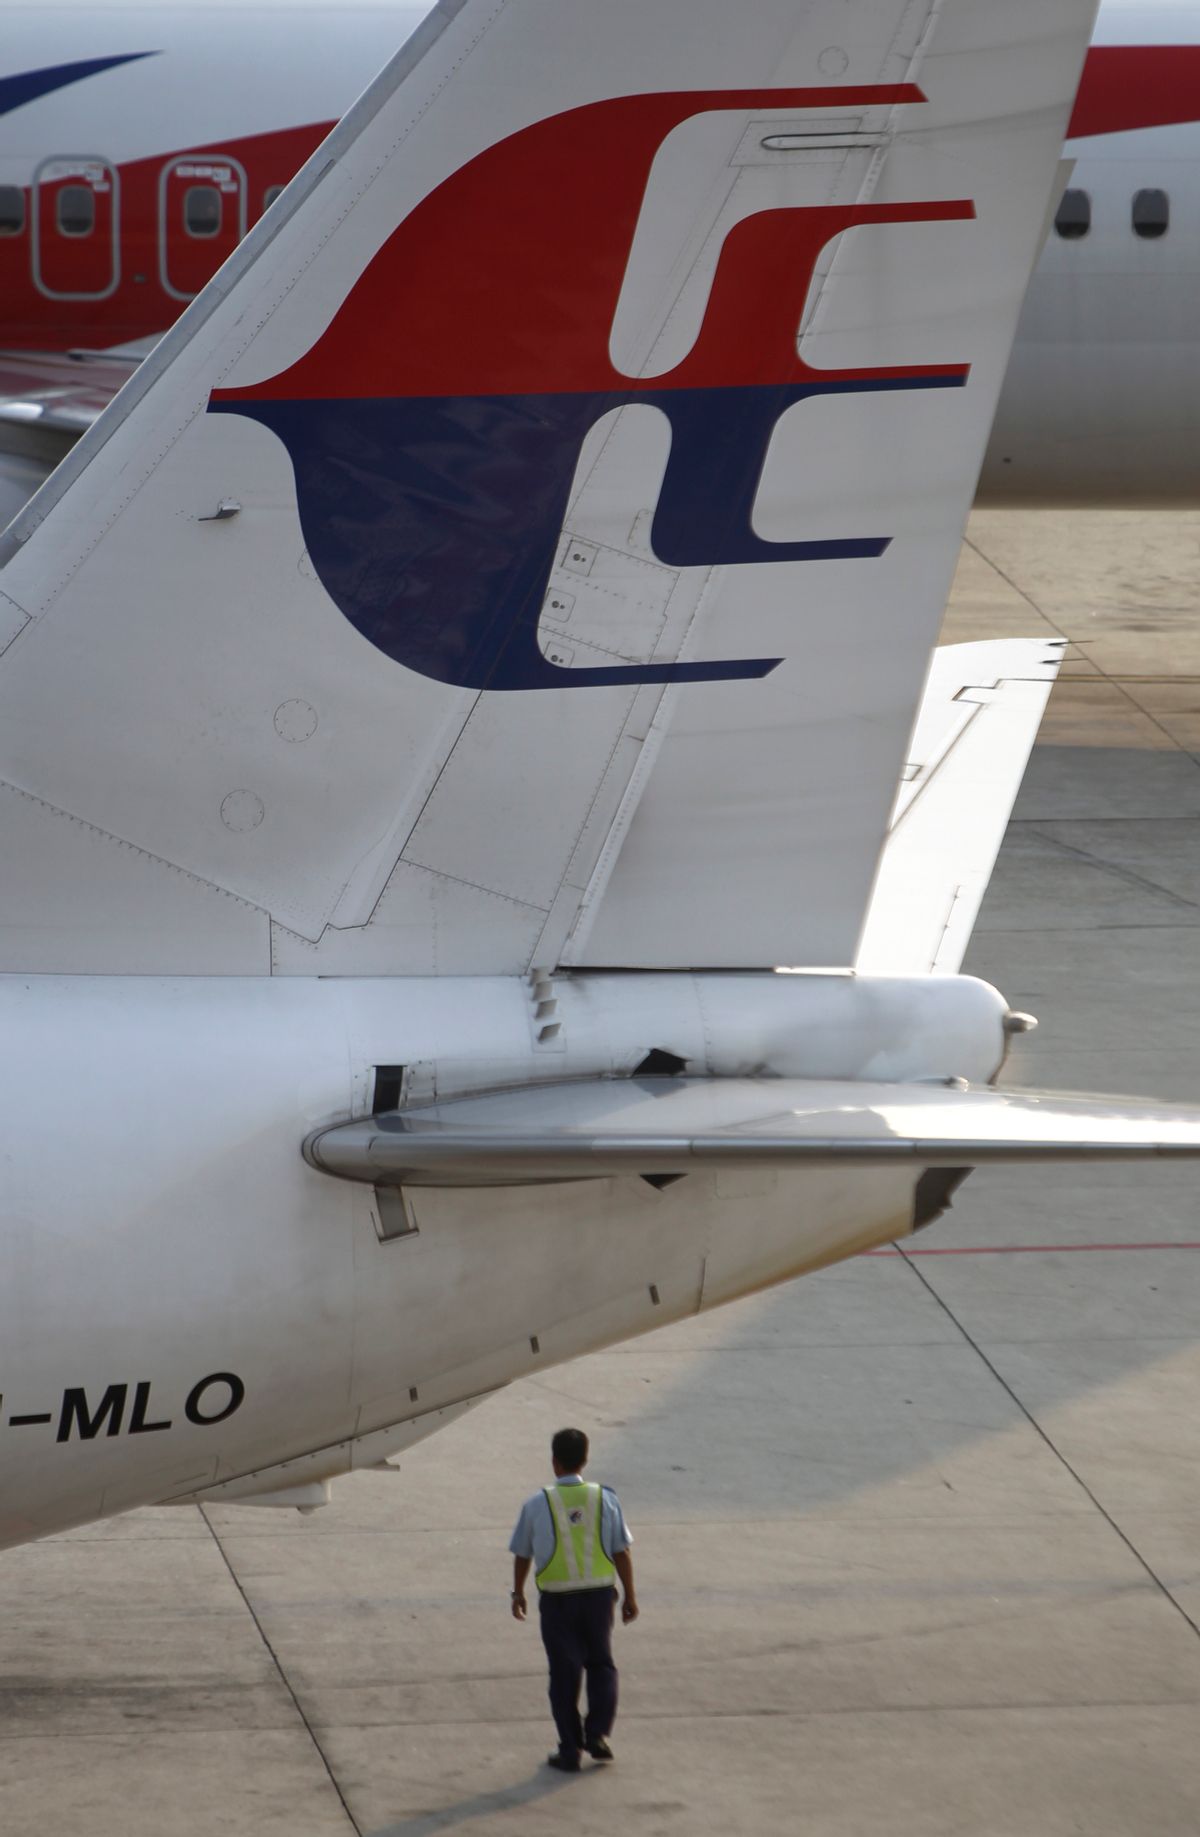 A ground staff member walks under a Malaysia Airlines plane at Kuala Lumpur International Airport in Sepang, Malaysia, Wednesday, March 12, 2014. The missing Malaysian jetliner may have attempted to turn back before it vanished from radar, but there is no evidence it reached the Strait of Malacca, Malaysia's air force chief said Wednesday, denying reported remarks he said otherwise. The statement suggested continued confusion over where the Boeing 777 might have ended up, more than four days after it disappeared en route to Beijing from Kuala Lumpur with 239 people on board. (AP Photo/Lai Seng Sin)    (AP)